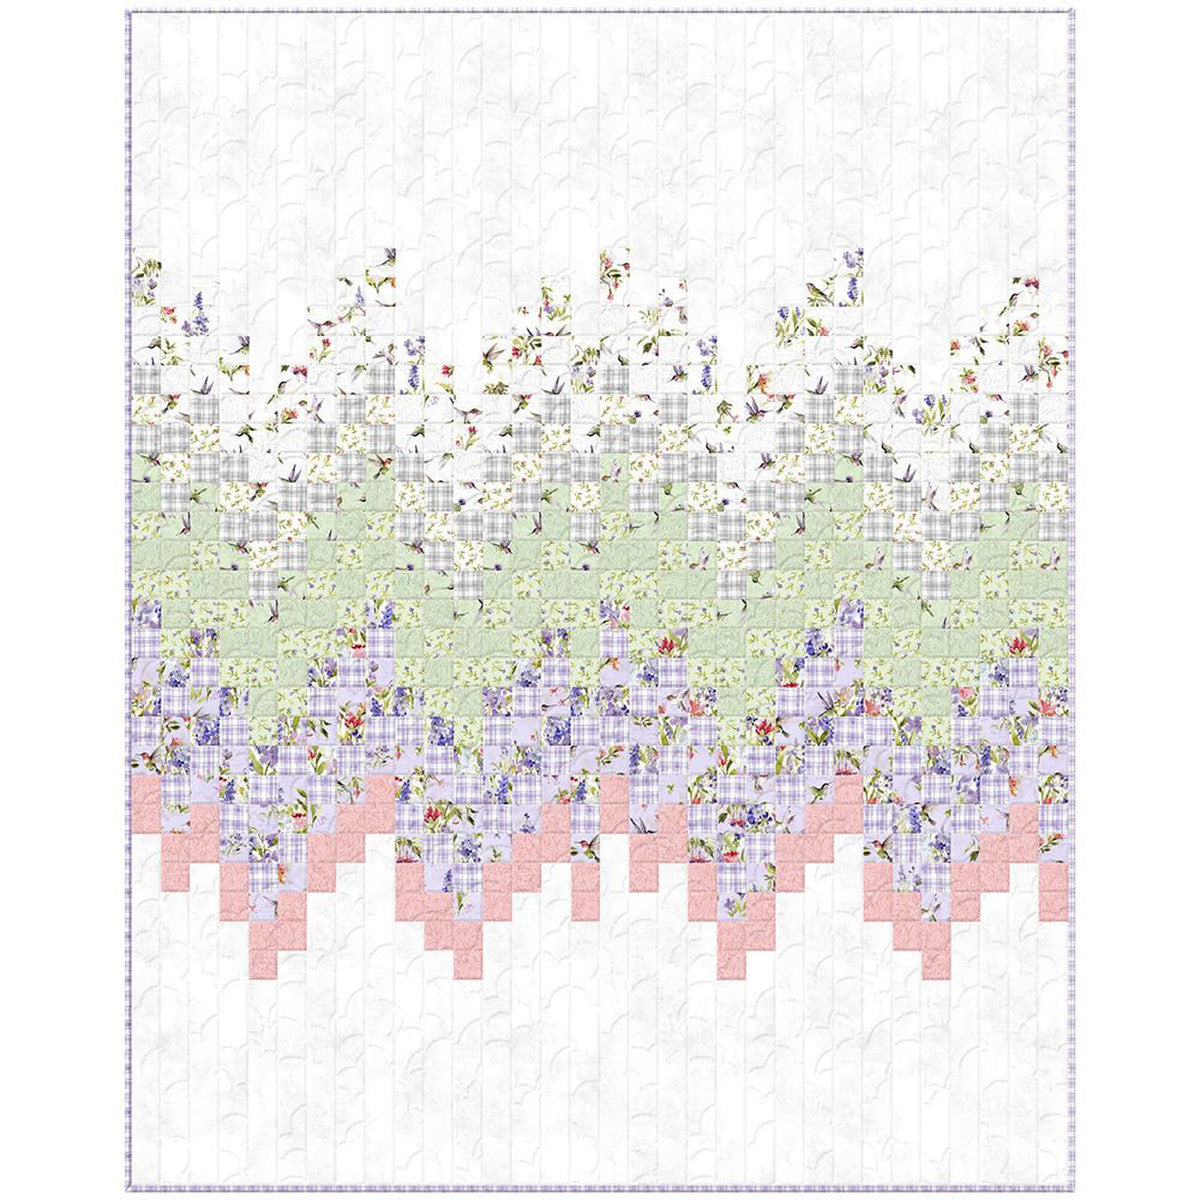 Confetti Hummingbird Floral Quilt Kit  From Wilmington Prints  By Susan Winget  Finished Quilt Size 64" x 80"